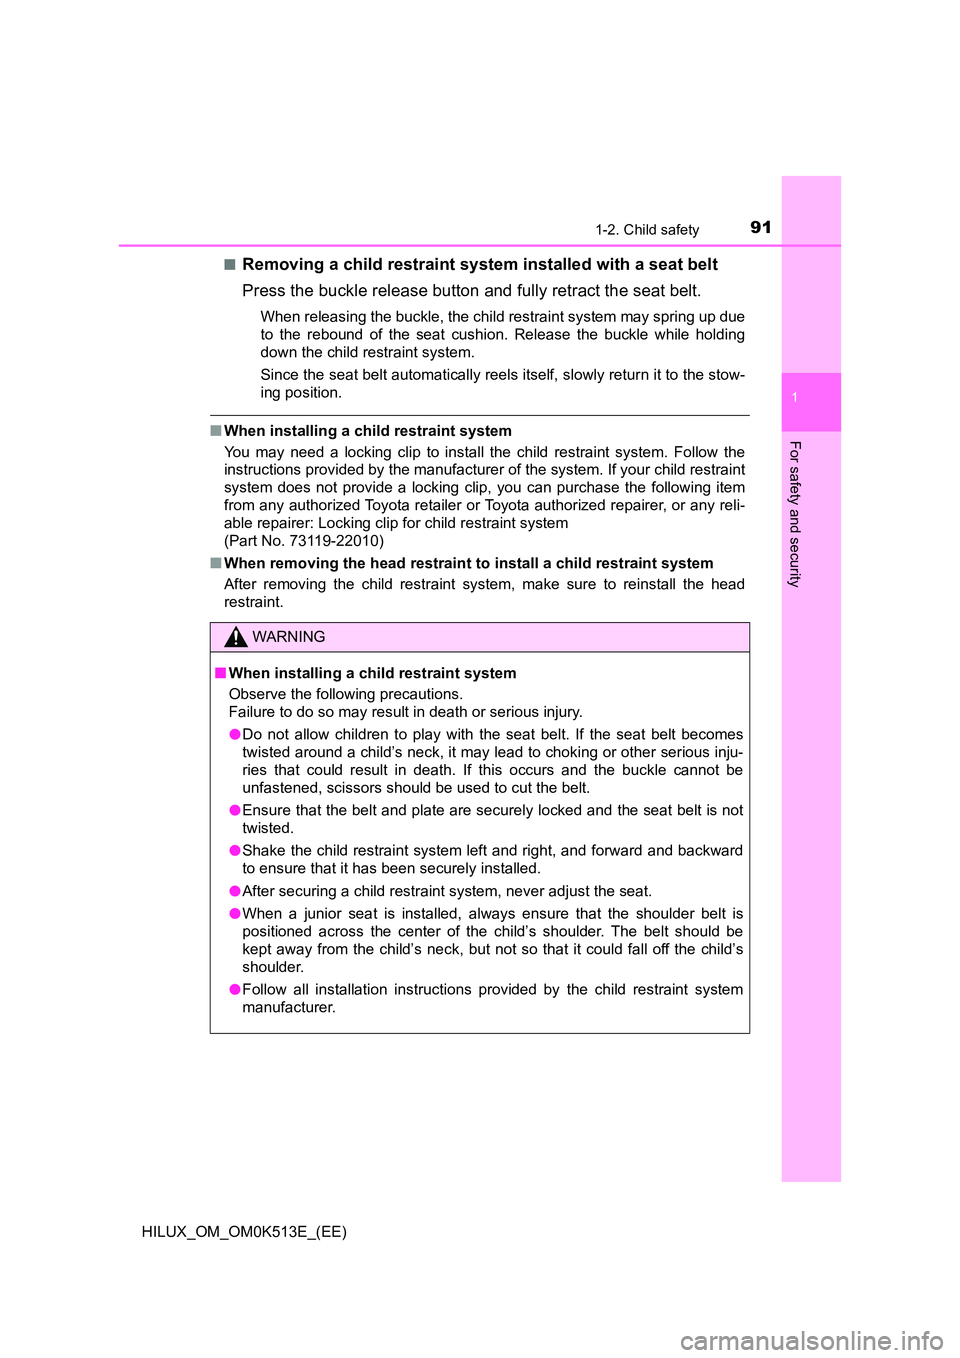 TOYOTA HILUX 2021  Owners Manual (in English) 911-2. Child safety
1
HILUX_OM_OM0K513E_(EE)
For safety and security
�QRemoving a child restraint system installed with a seat belt 
Press the buckle release button and fully retract the seat belt.
Wh